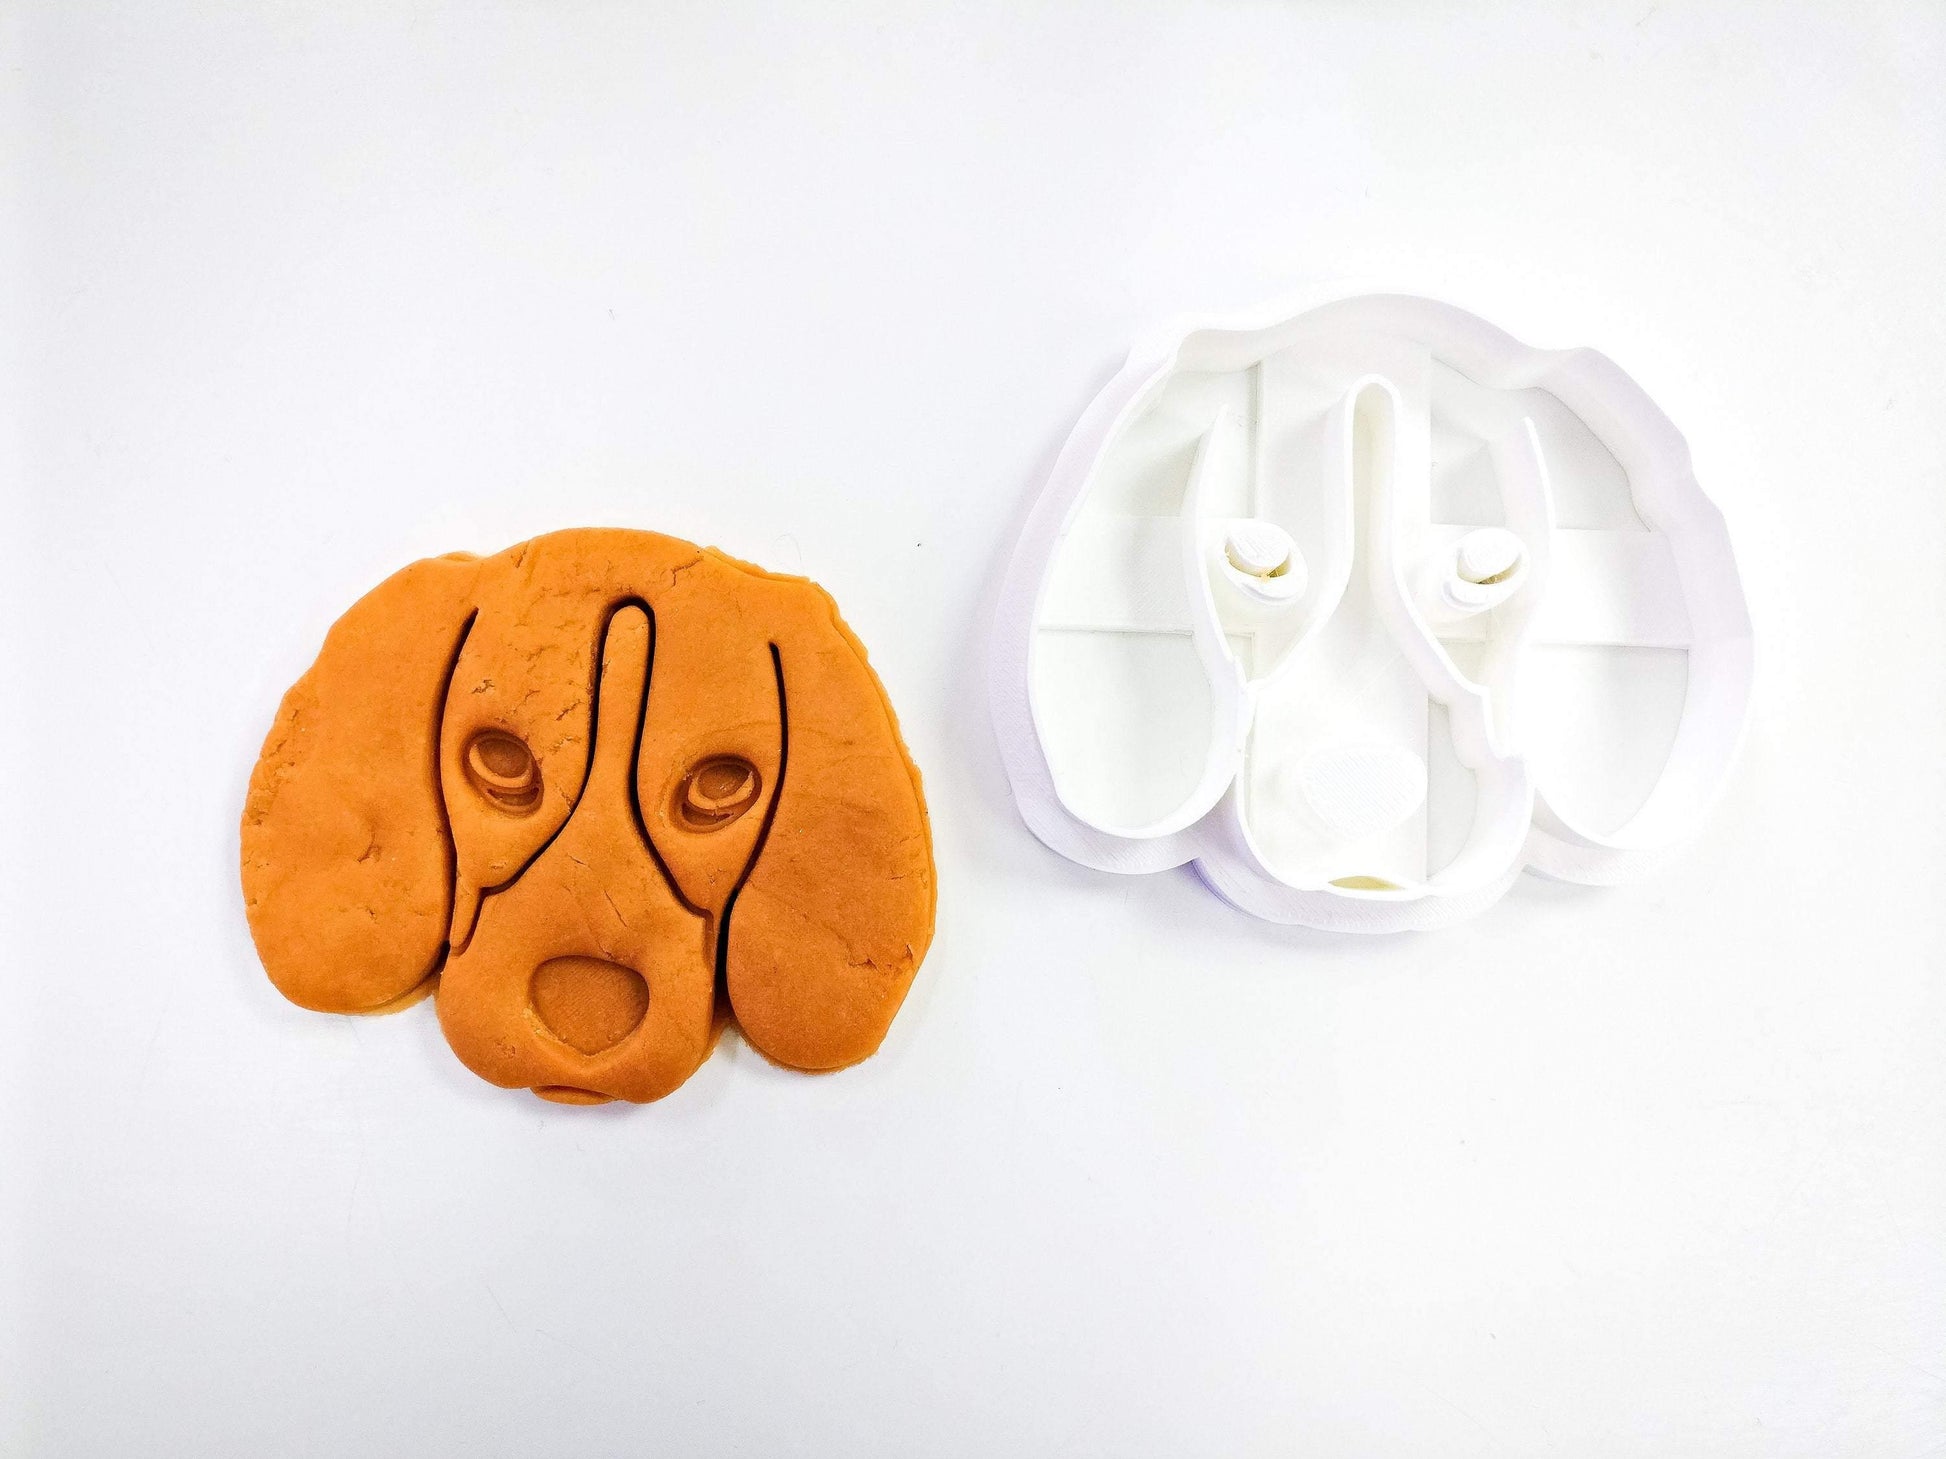 Beagle dog breed cookie cutter gift idea for dog lovers and dog trainers | biscuits fondant clay cheese sugarpaste marzipan - Malta Cookie Cutters